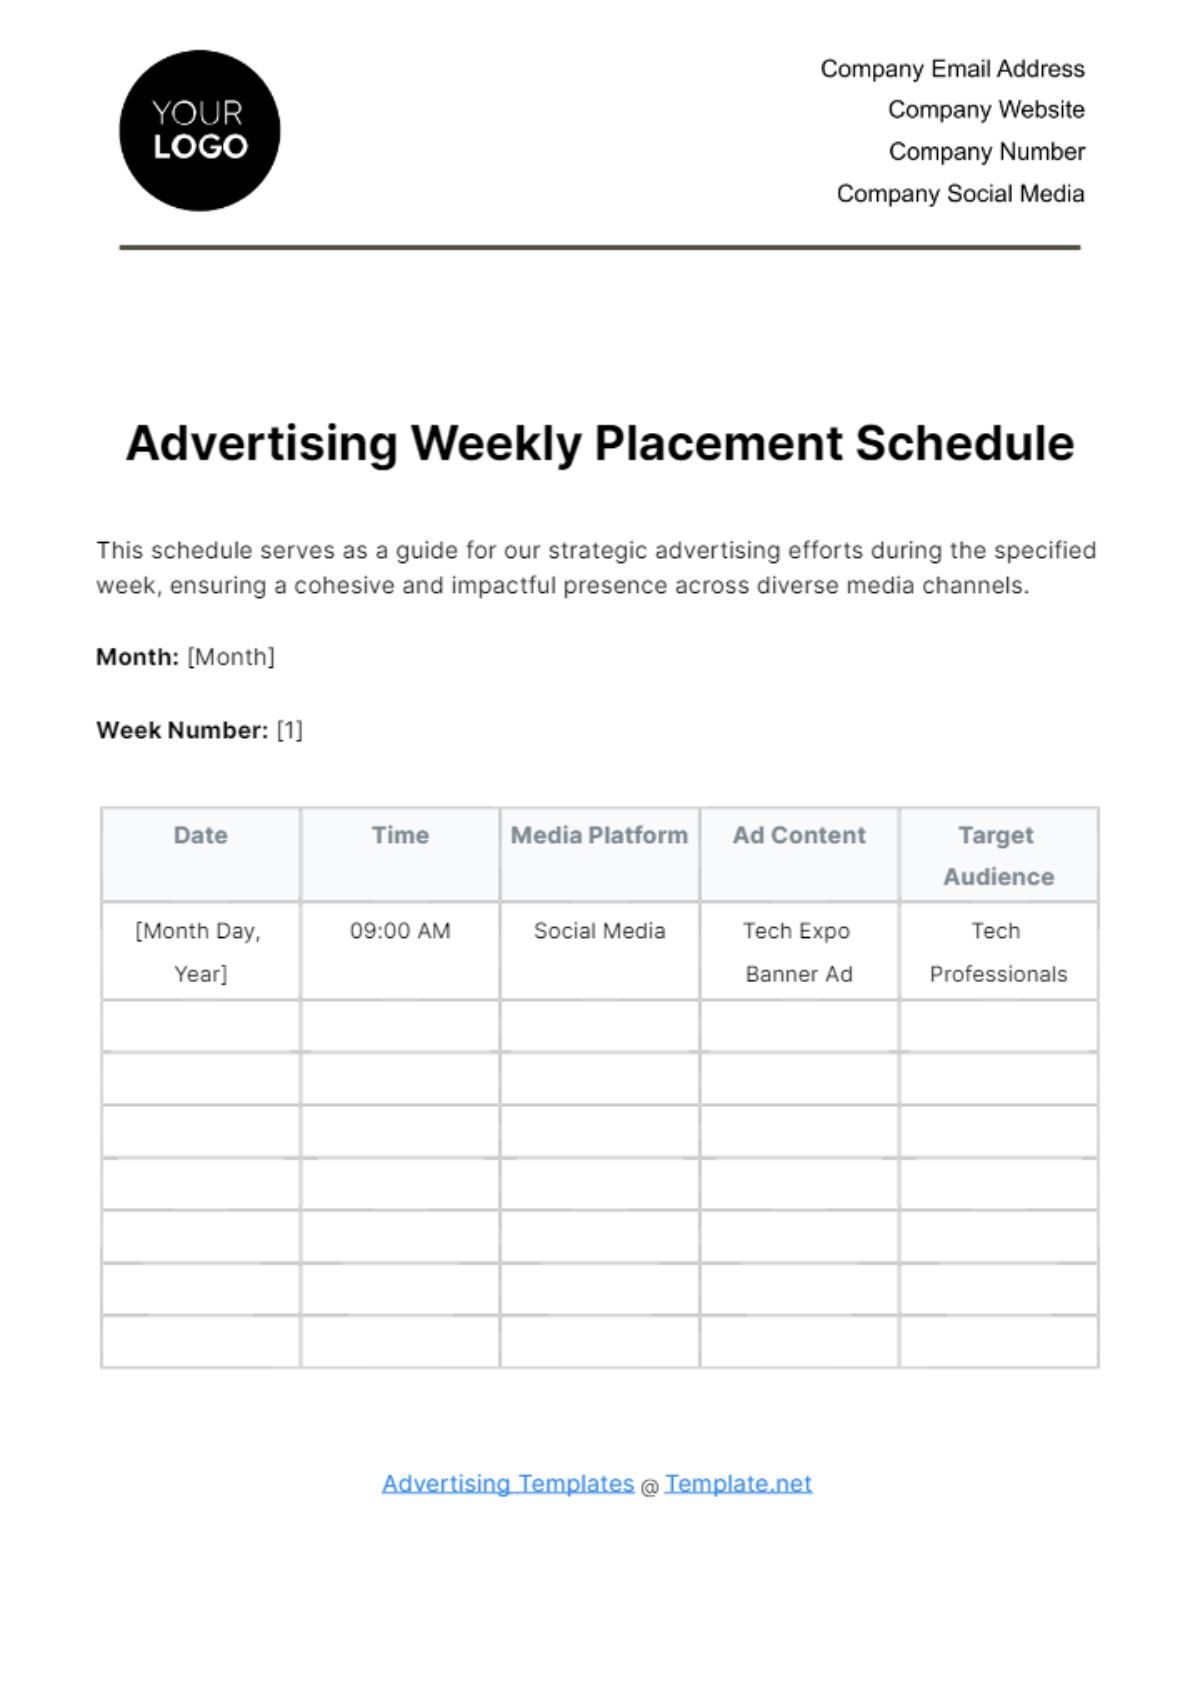 Advertising Weekly Placement Schedule Template